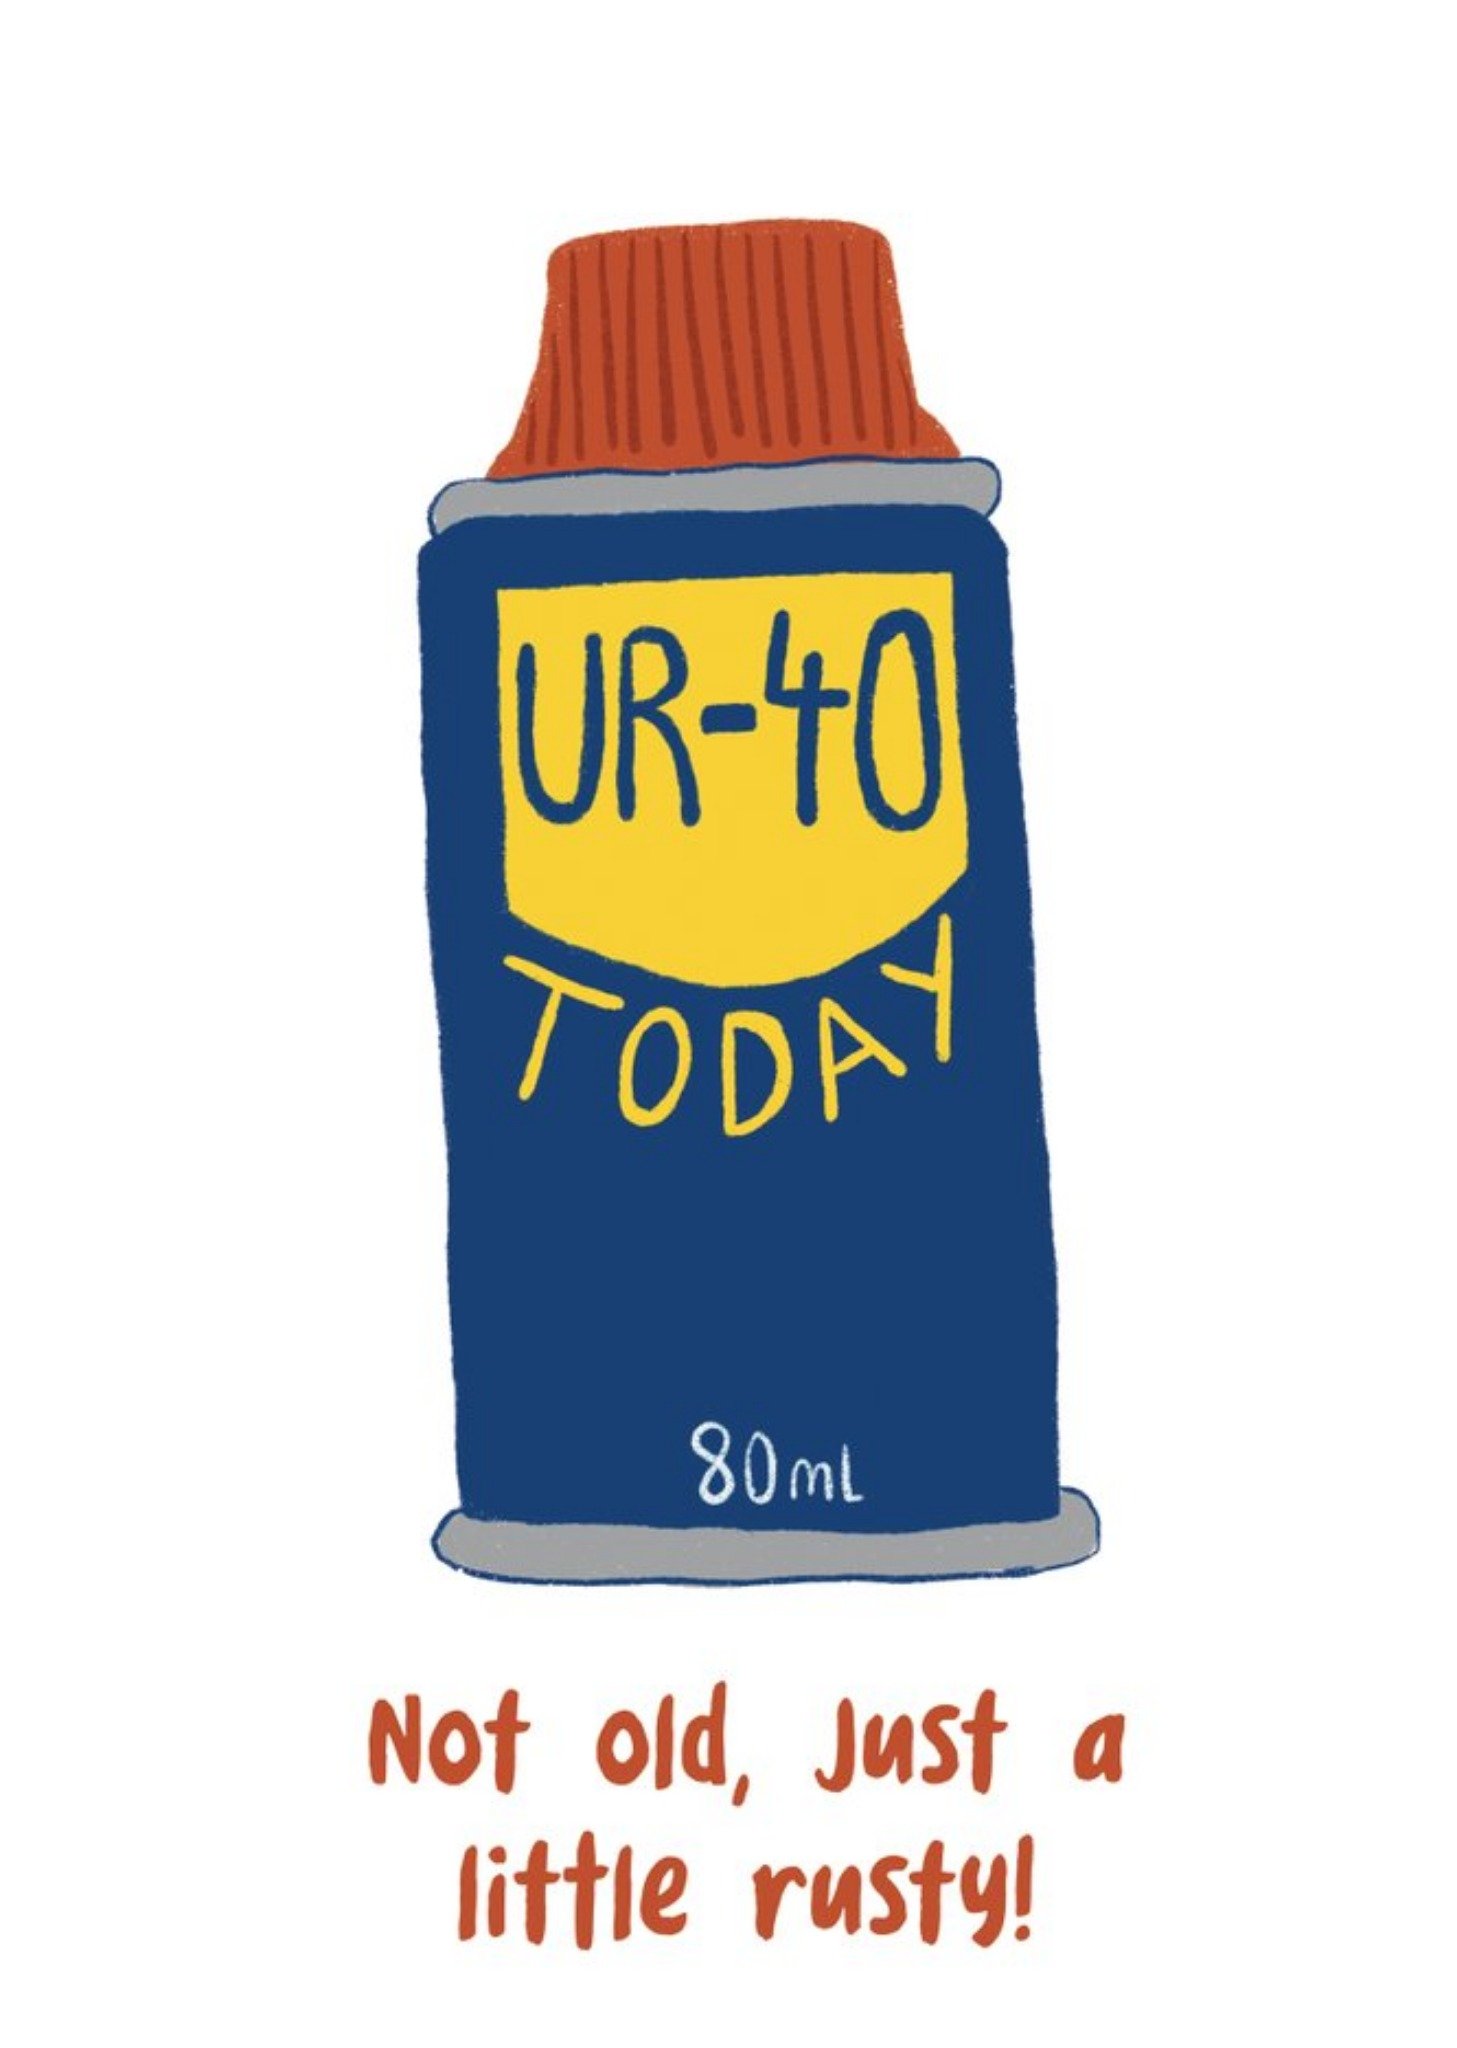 Moonpig Illustration Of A Well Known Mechanical Lubricant U R 40 Today Birthday Card, Large